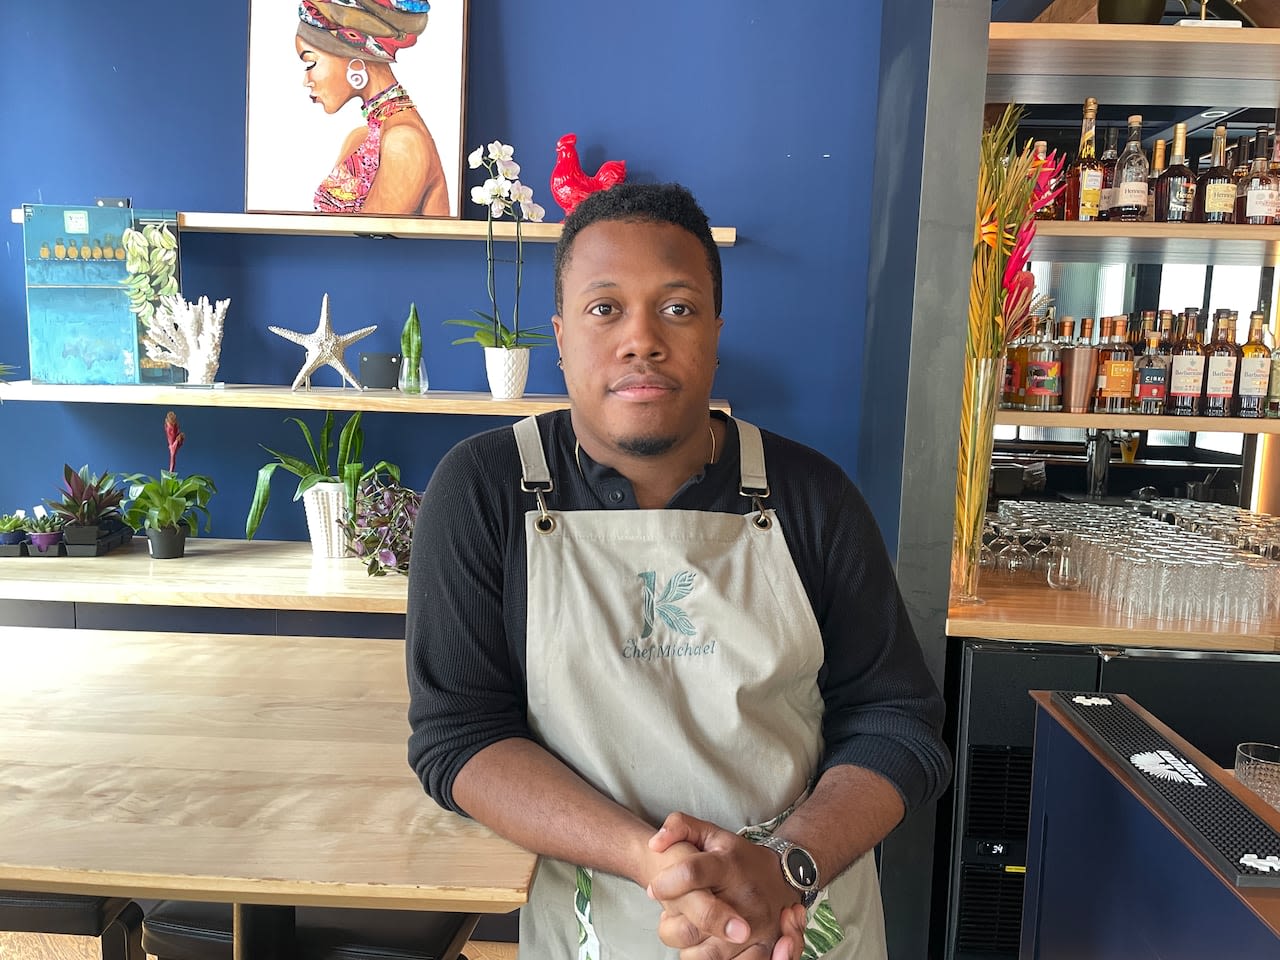 Montreal restaurateur hits immigration roadblock when trying to recruit staff from Haiti